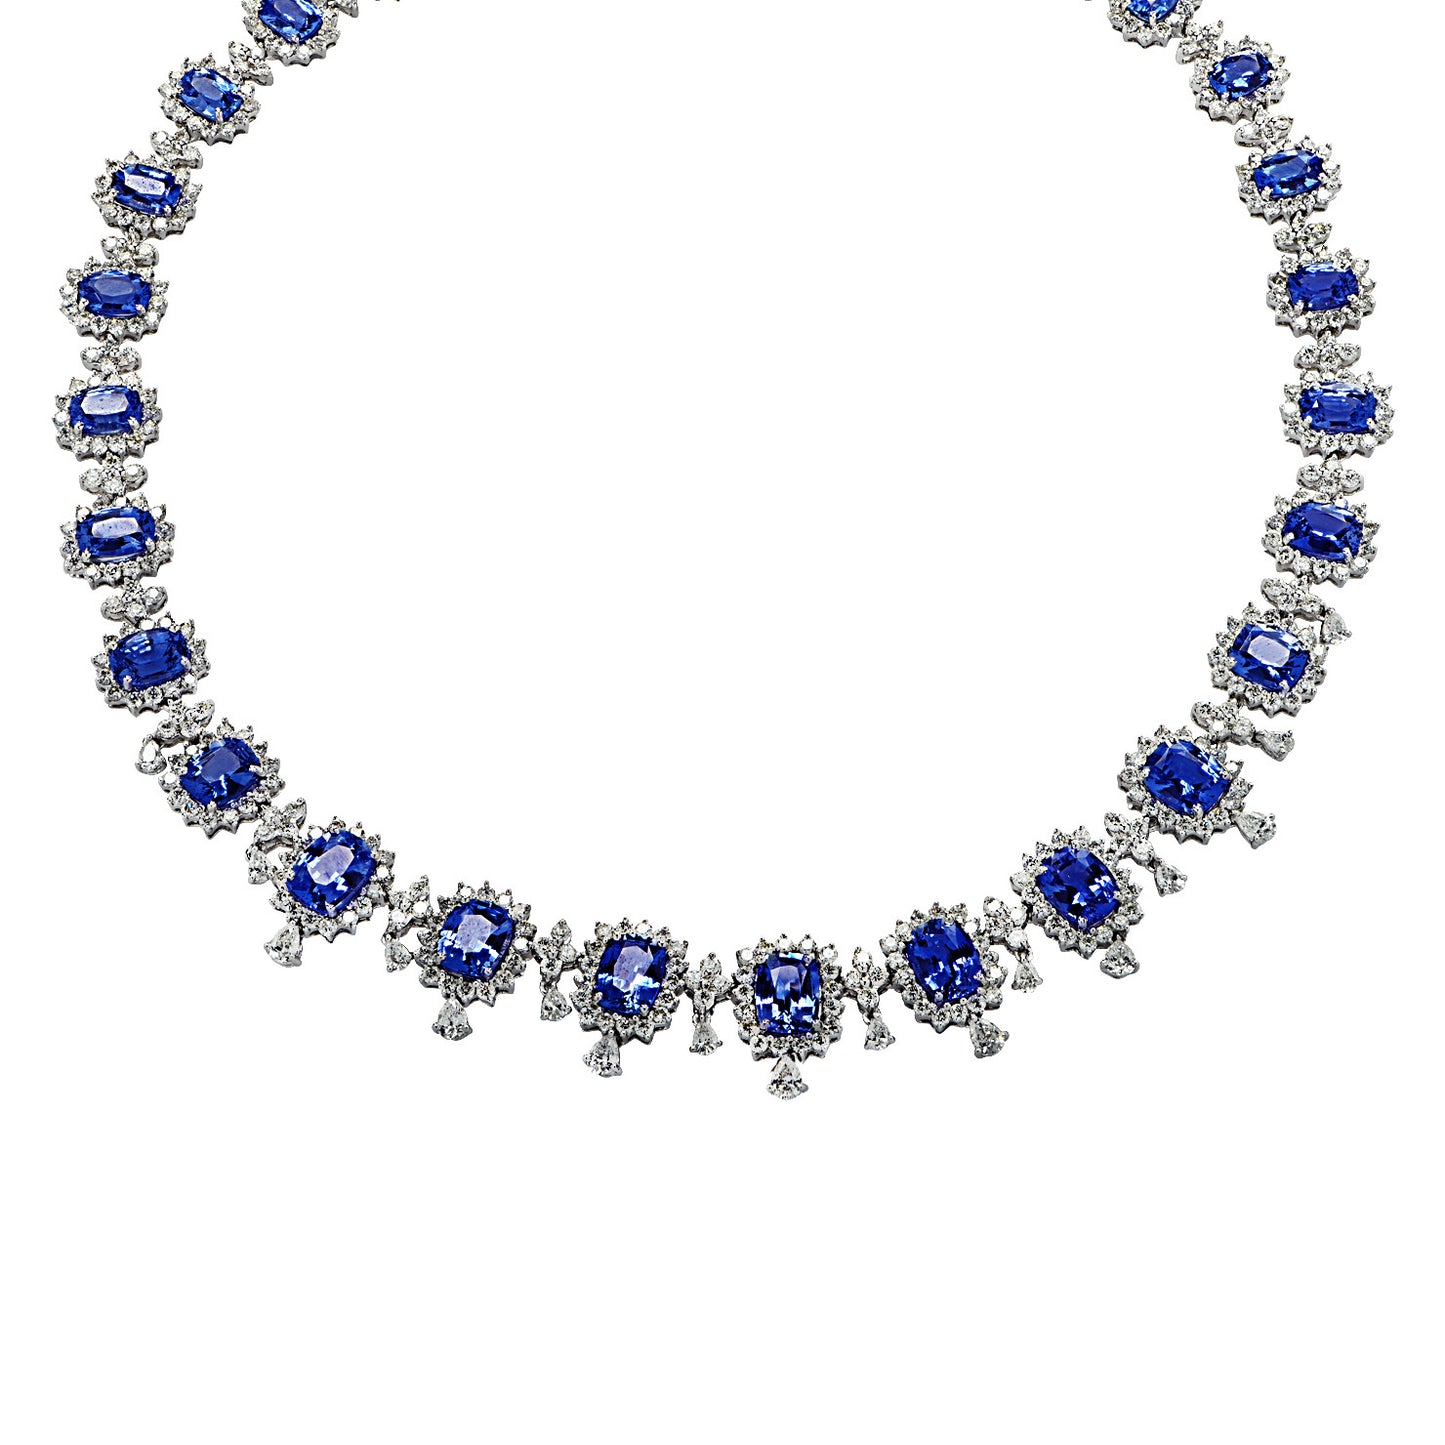 Post-1980s 18KT White Gold Sapphire & Diamond Necklace front